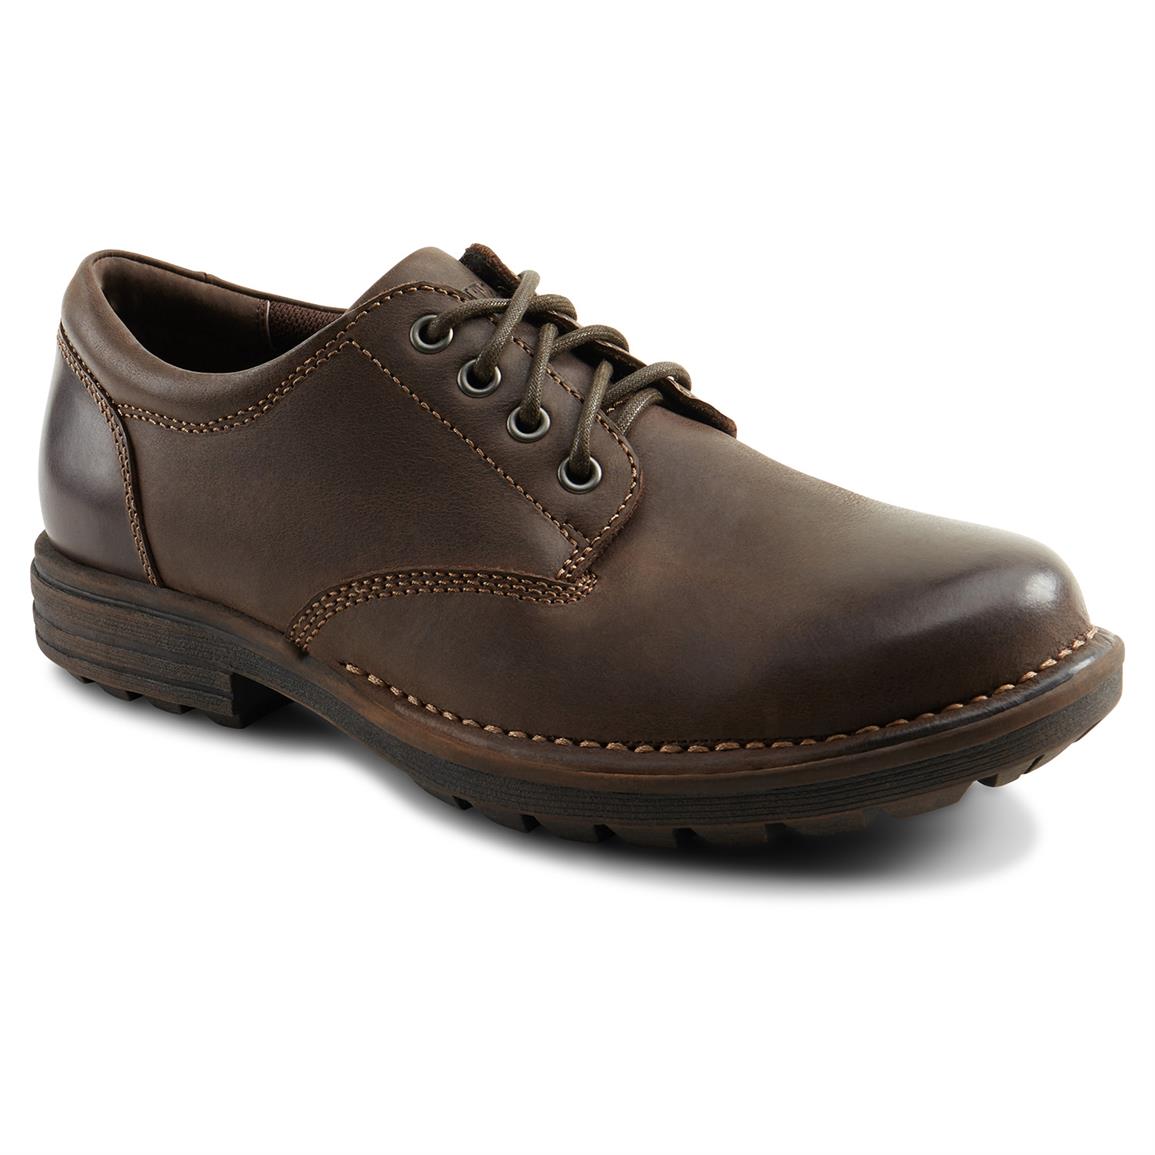 Eastland Xavier Oxford Shoes - 662705, Casual Shoes at Sportsman's Guide